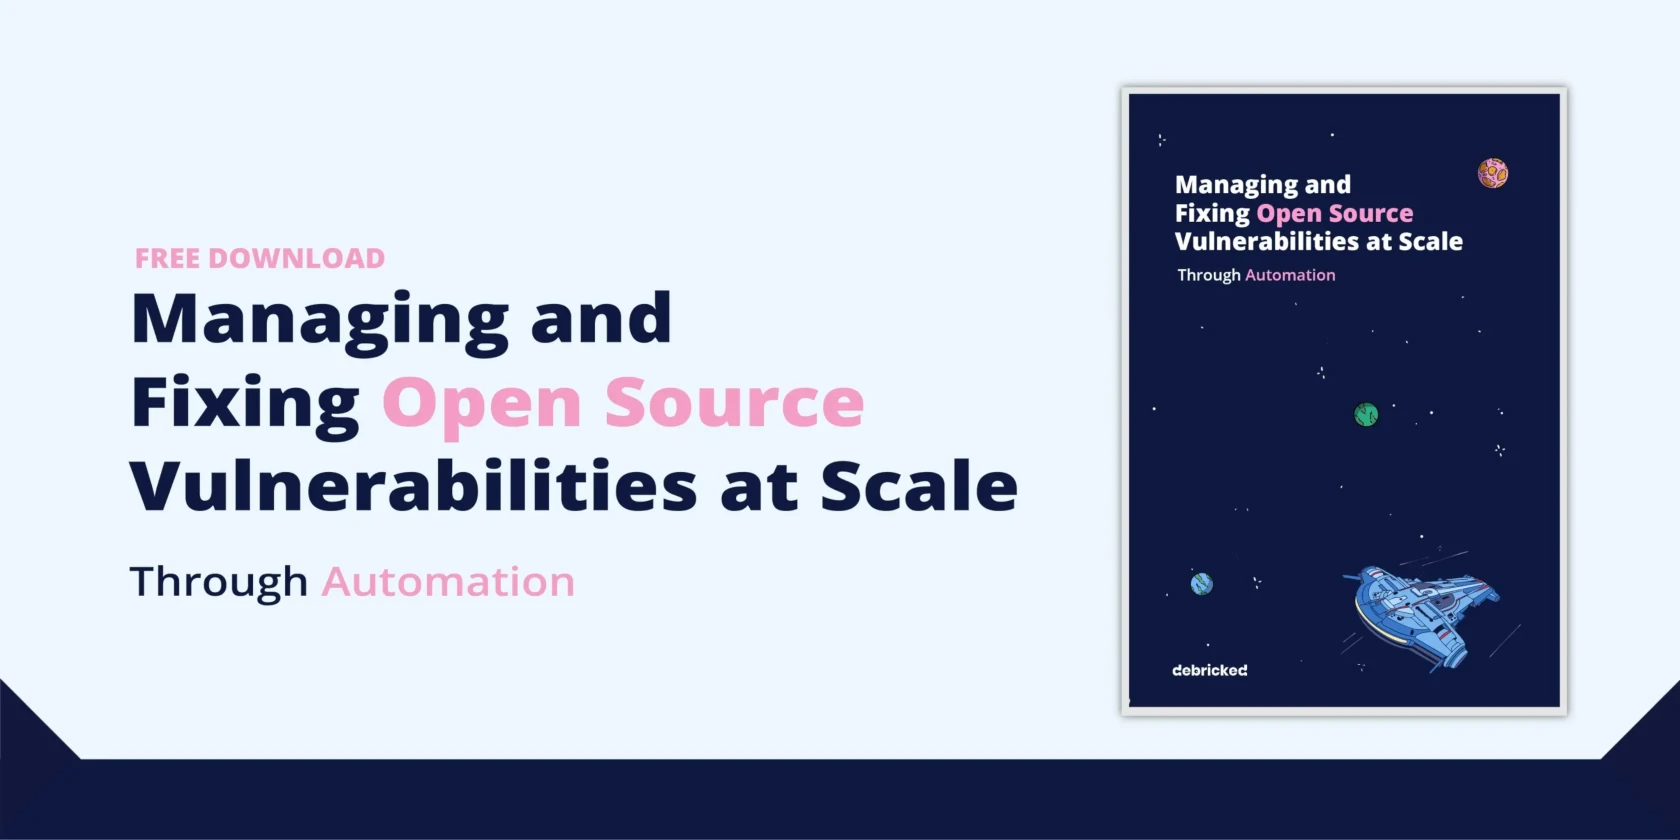 Ebook: Managing and Fixing Open Source Vulnerabilities at Scale through Automation